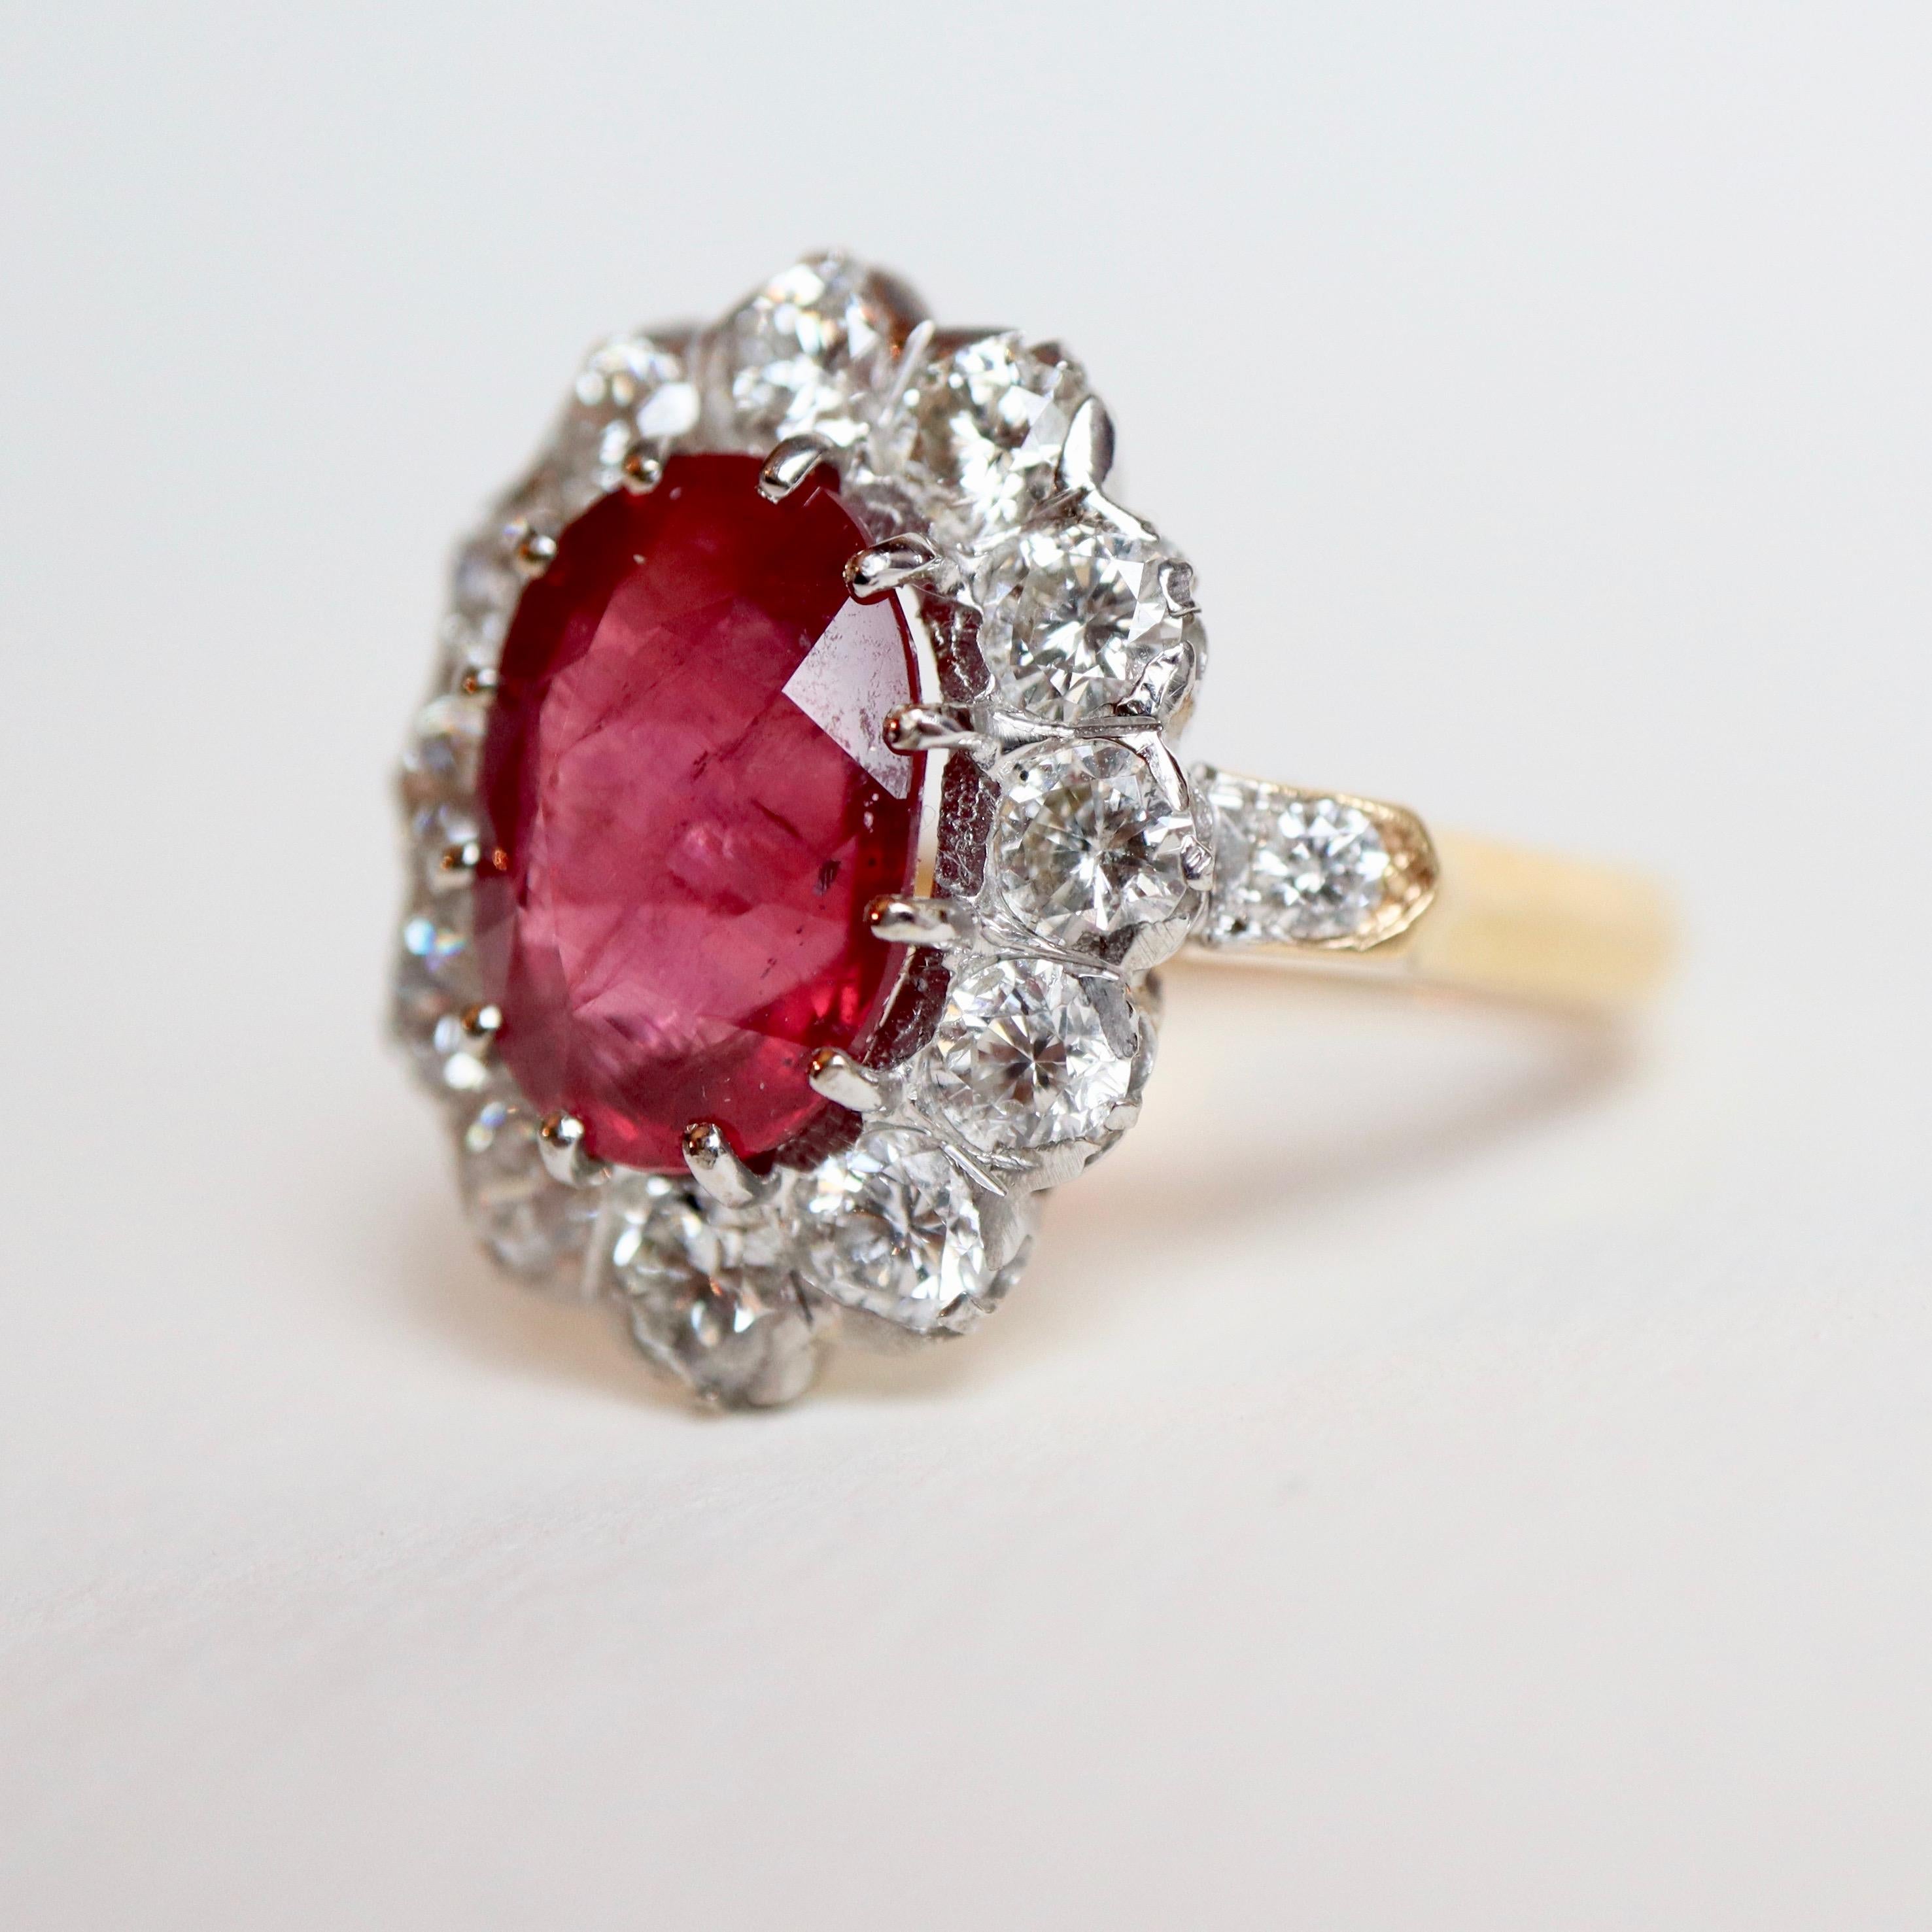 Pompadour model ring in 18K yellow gold, diamonds and 5.12K rubies
Pompadour model ring in 18K yellow gold setting in its center a large prong-set ruby weighing 5.12 carats surrounded by 12 diamonds of approximately 0.15 carats each for a total